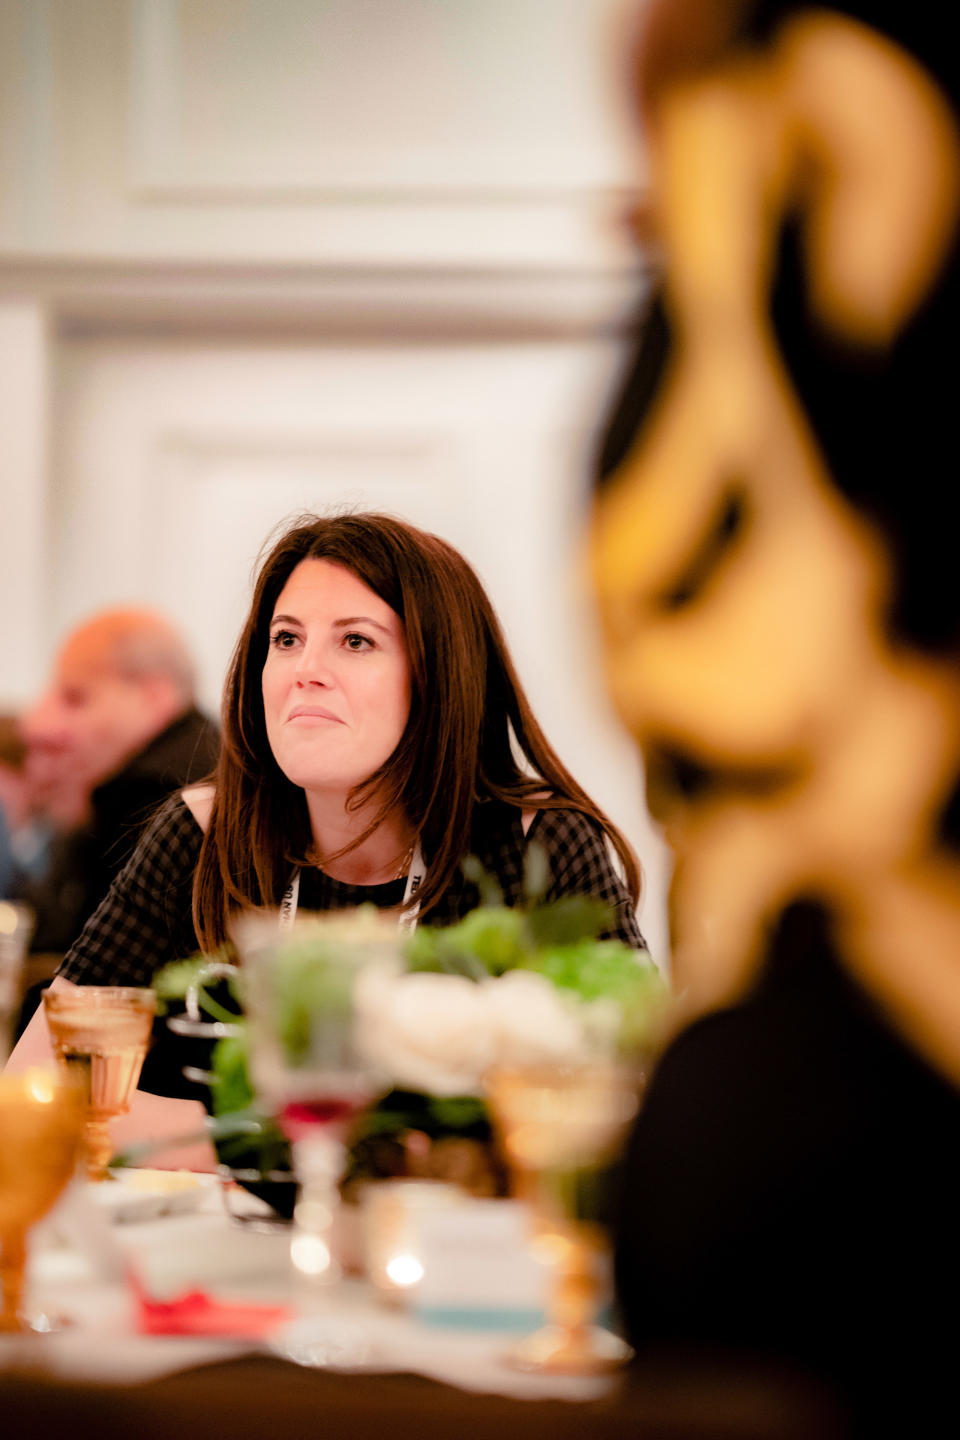 Lewinsky sits at a table during a dinner